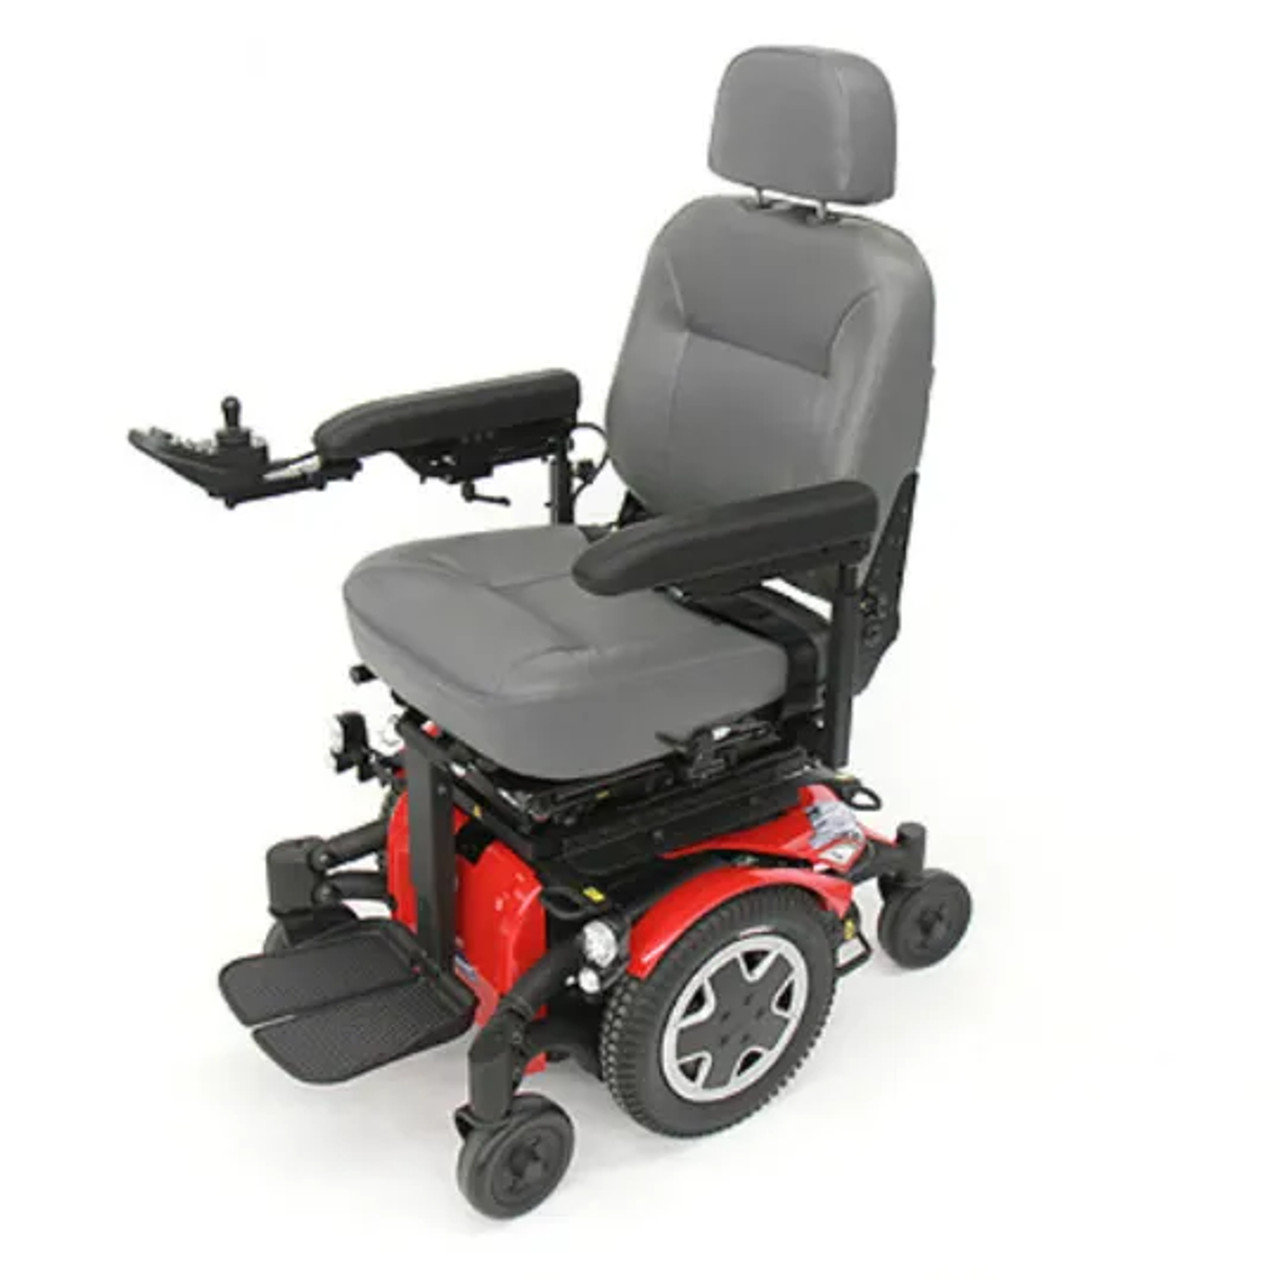 Invacare TDX SP2 Power Wheelchair - Captains Seat, LiNX Technology-Chicken Pieces